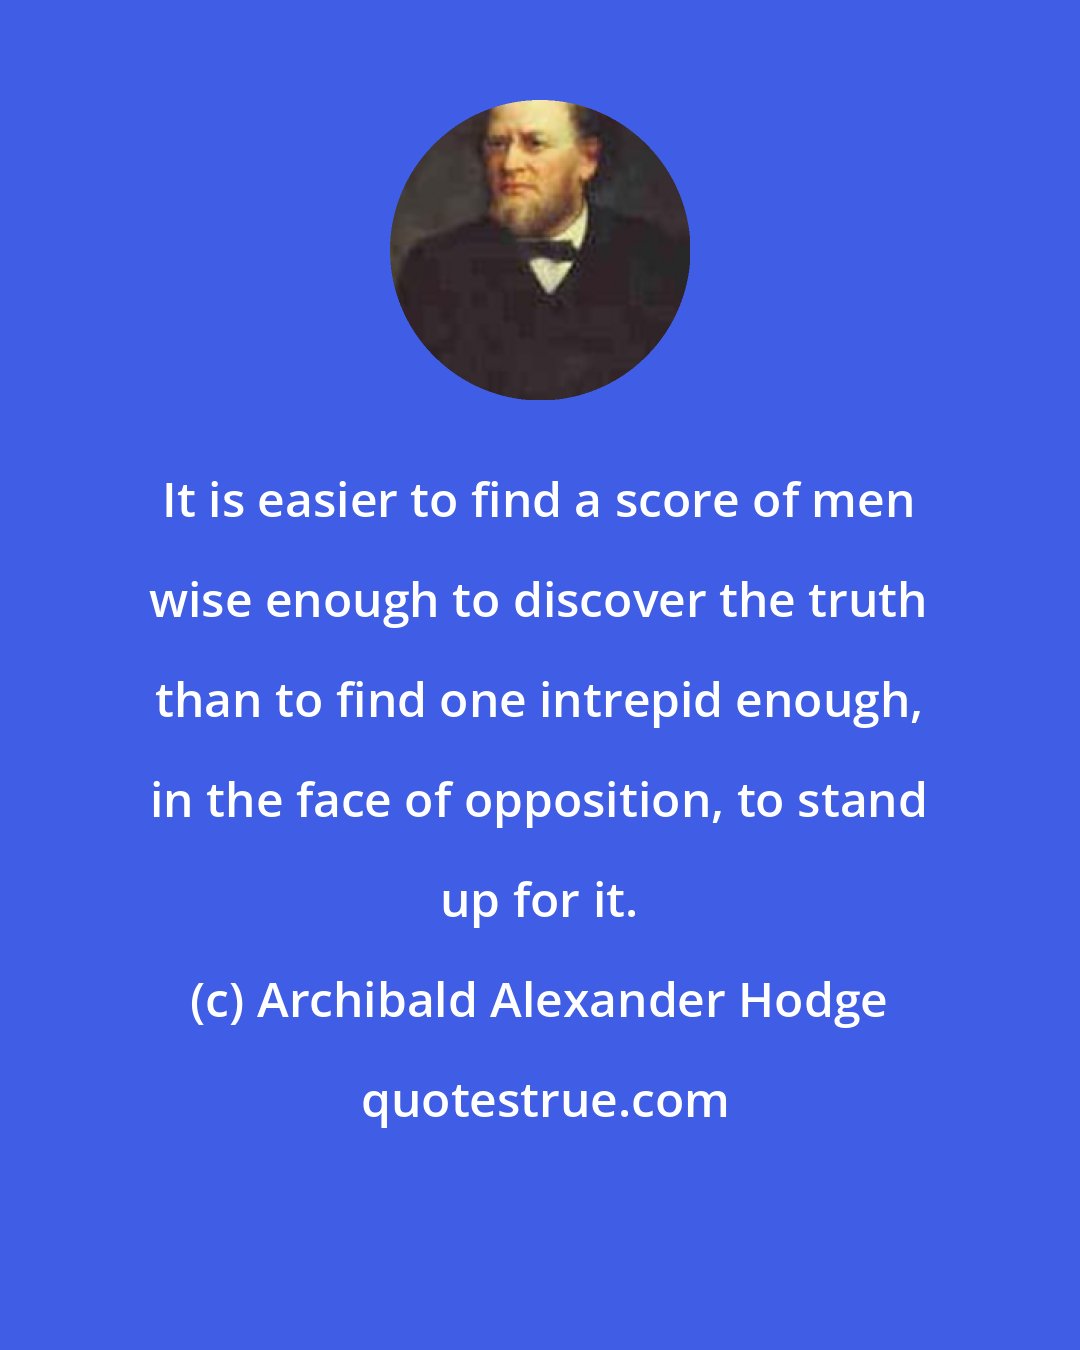 Archibald Alexander Hodge: It is easier to find a score of men wise enough to discover the truth than to find one intrepid enough, in the face of opposition, to stand up for it.